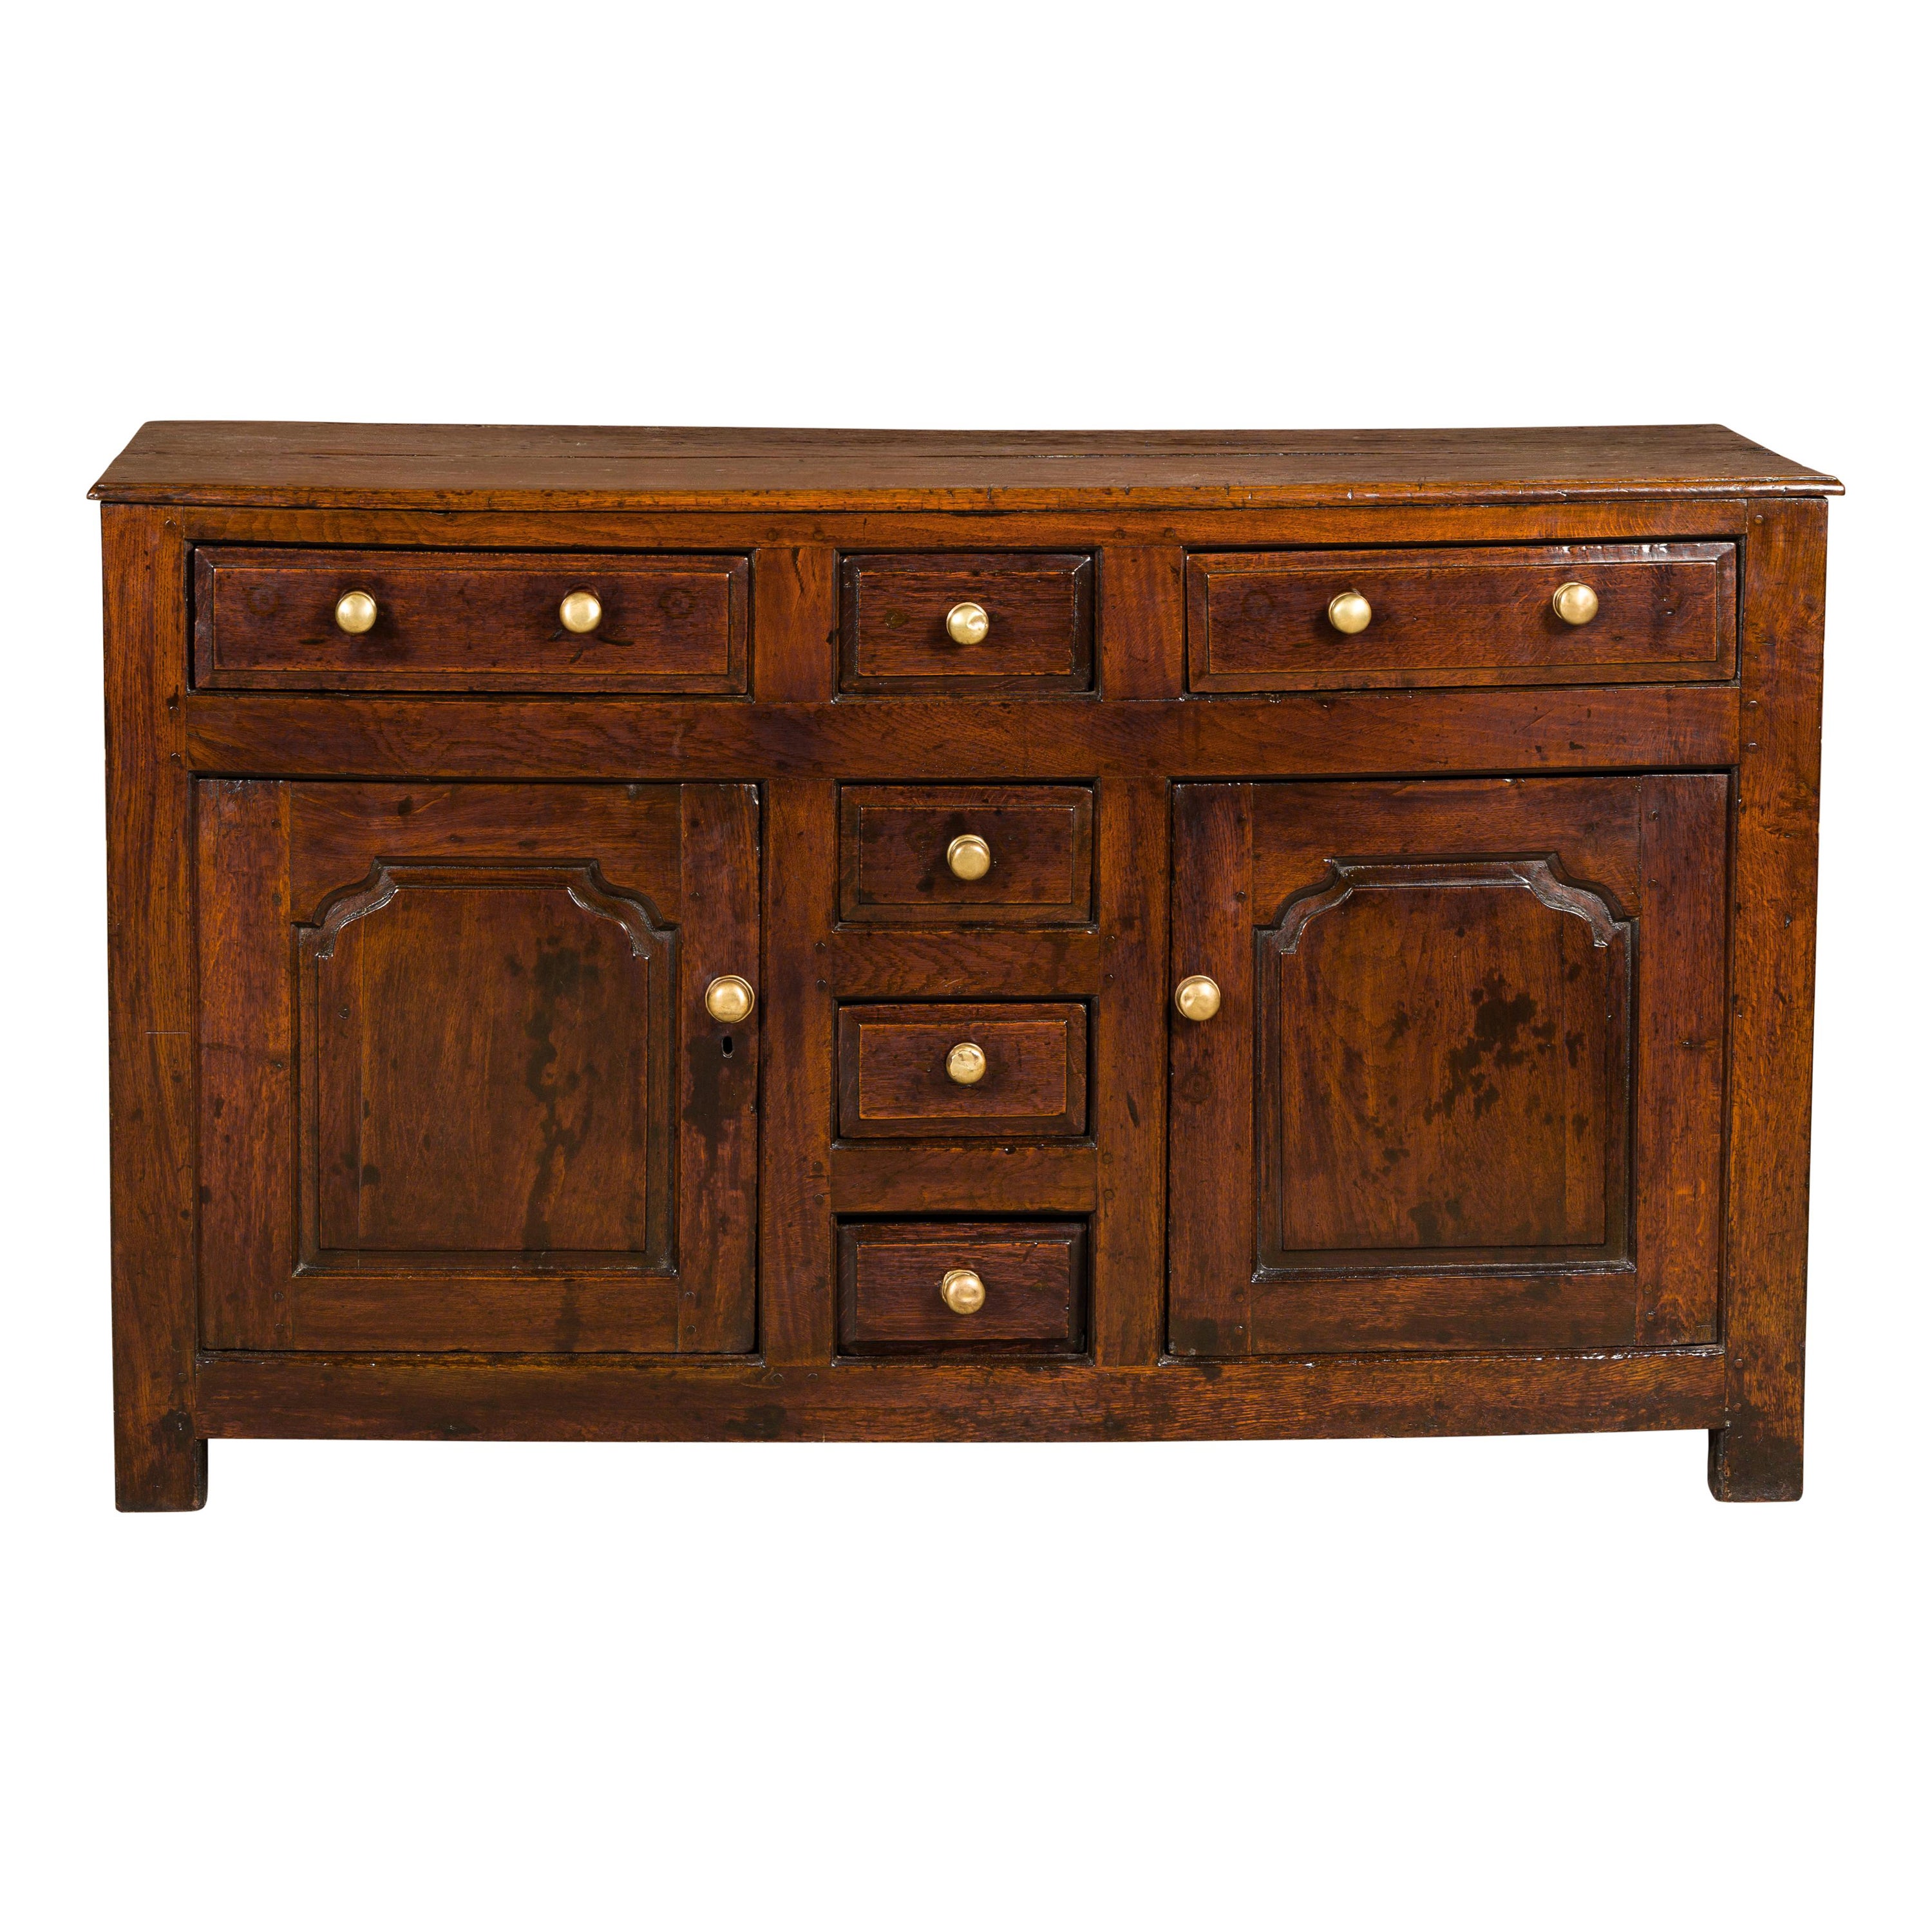 English George III Period 1800s Oak Buffet with Six Drawers and Two Doors For Sale